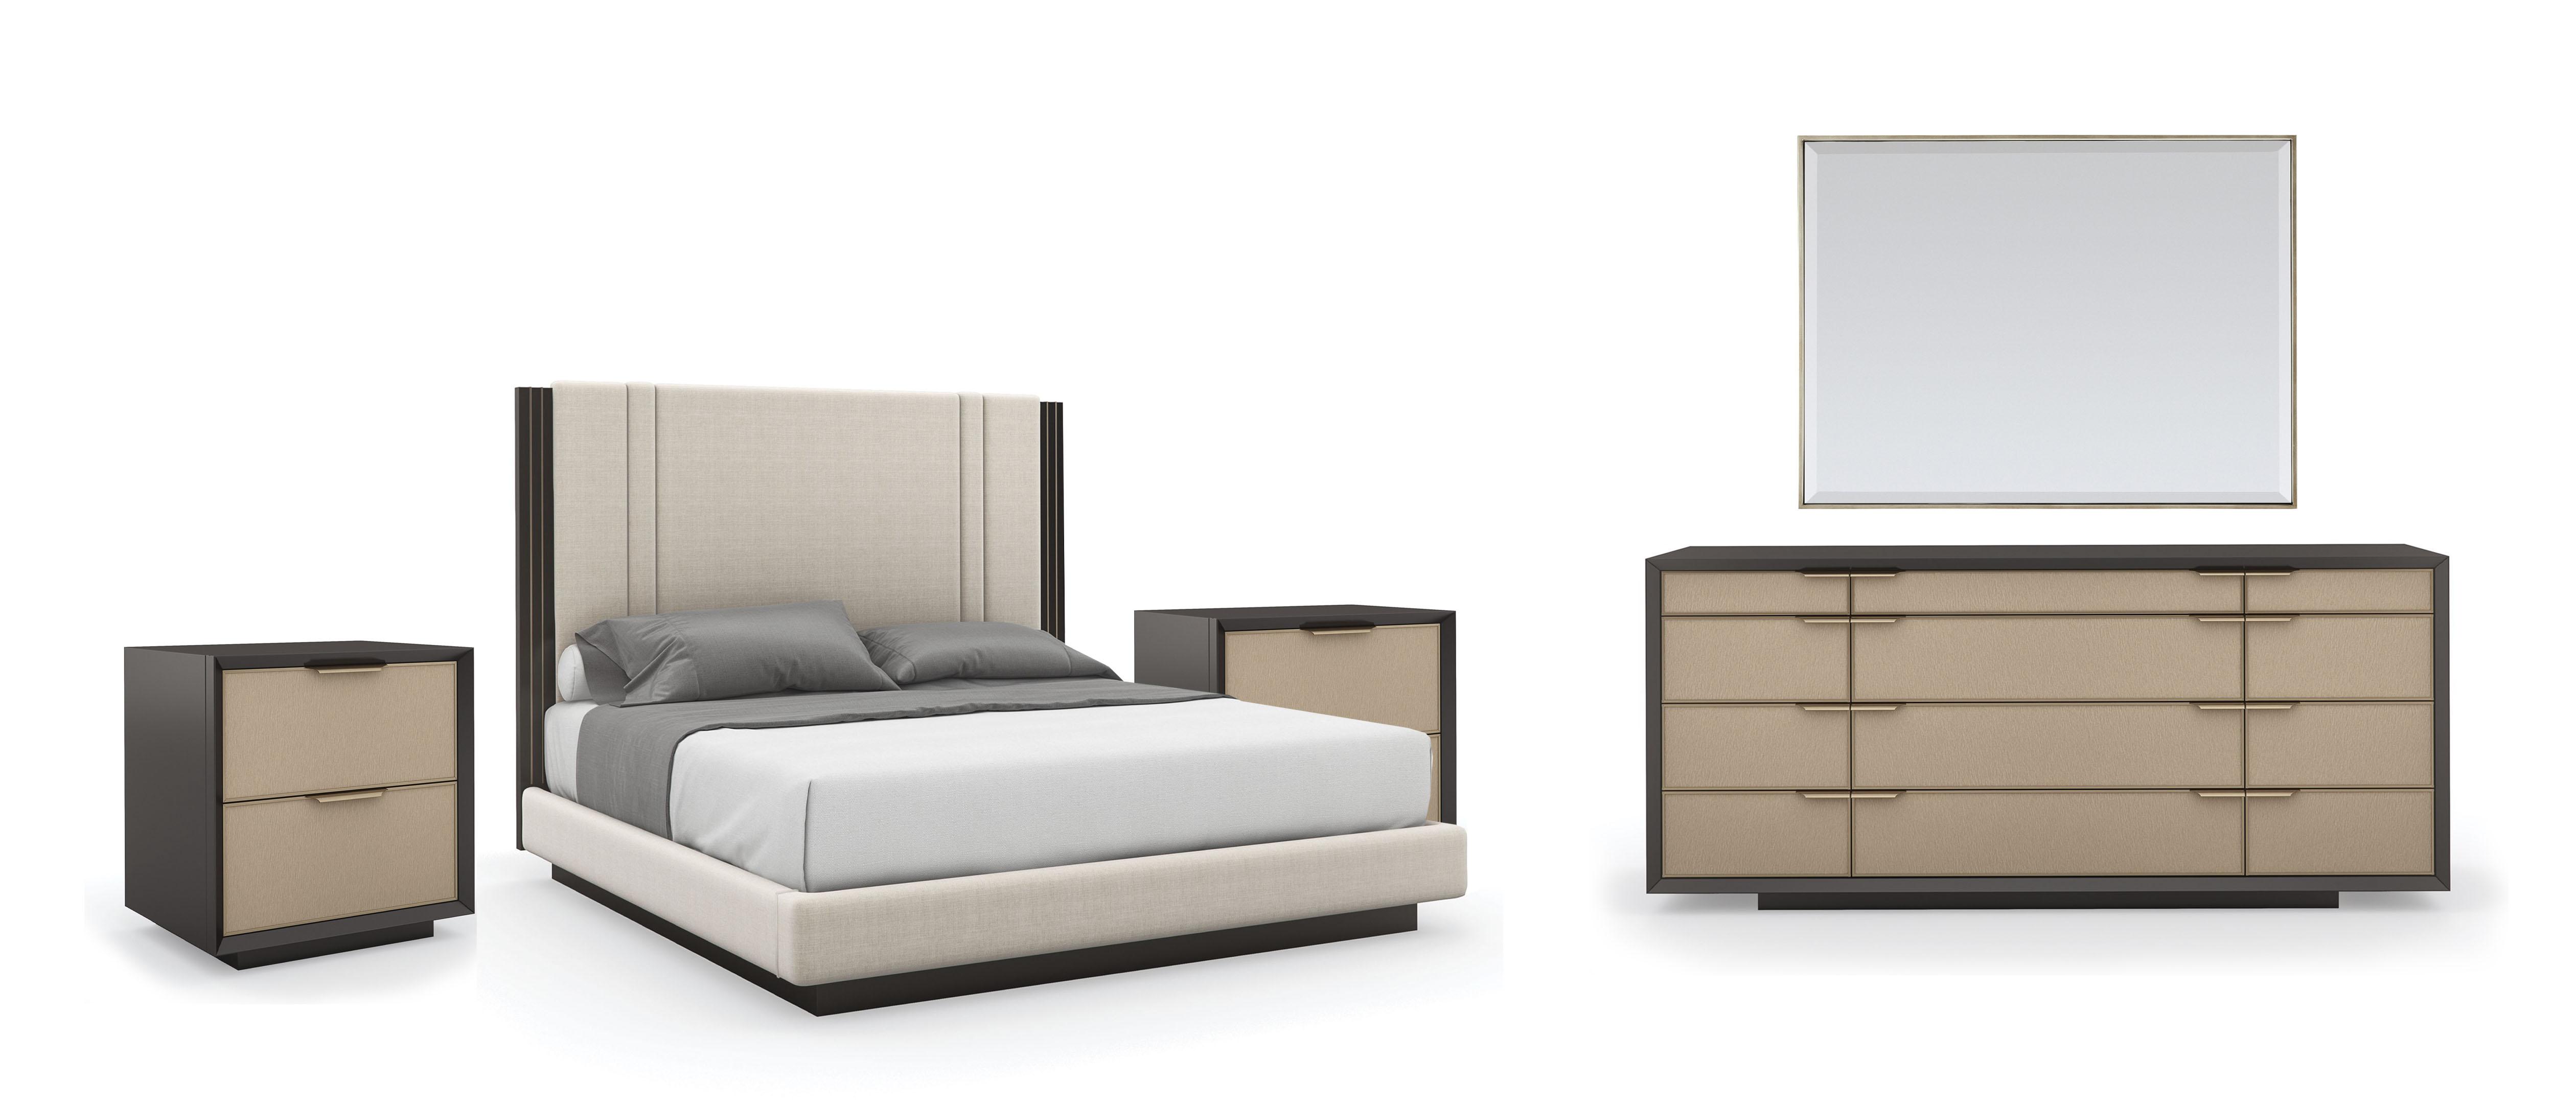 Contemporary Platform Bed Set DECENT PROPOSAL / DOUBLE WRAP / ALL WRAPPED UP / REMIX RECTANGLE MIRROR CLA-020-125-Set-5 in Light Gray Fabric